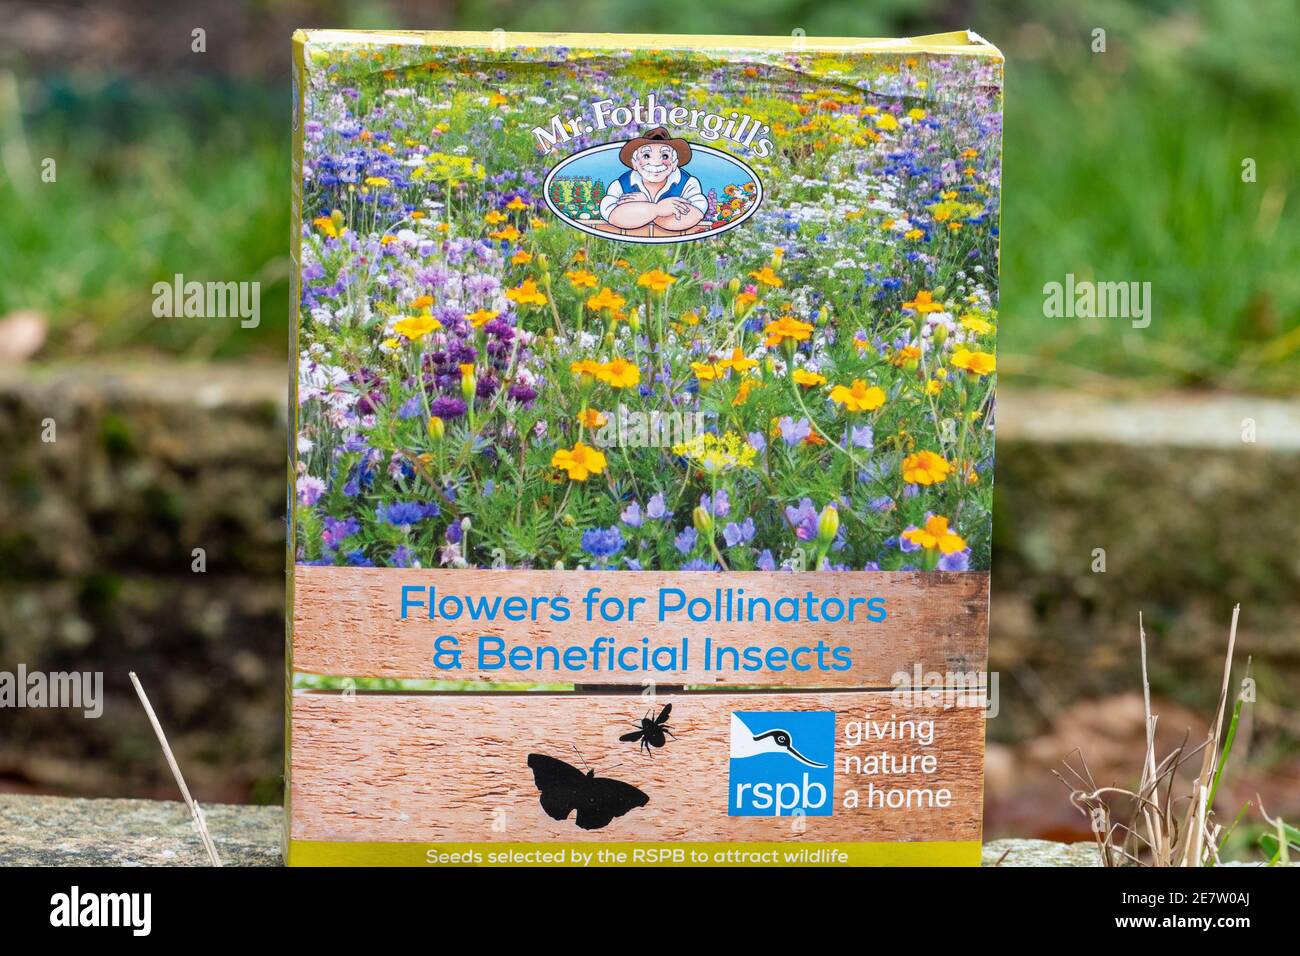 Mr Fothergill's seeds, packet of wildflower seeds, flowers for pollinators and beneficial insects, UK Stock Photo